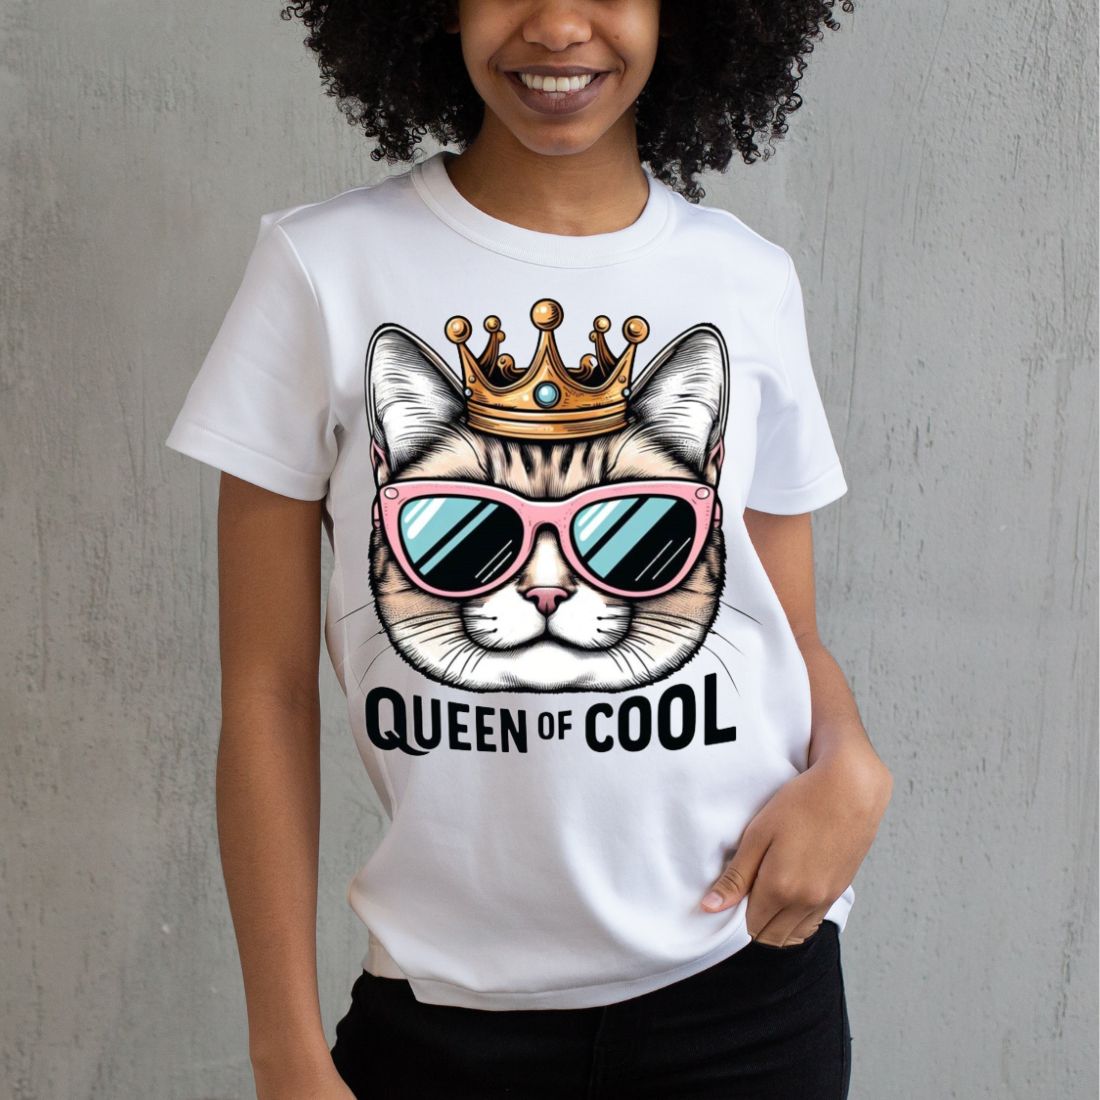 Queen of Cool design preview image.